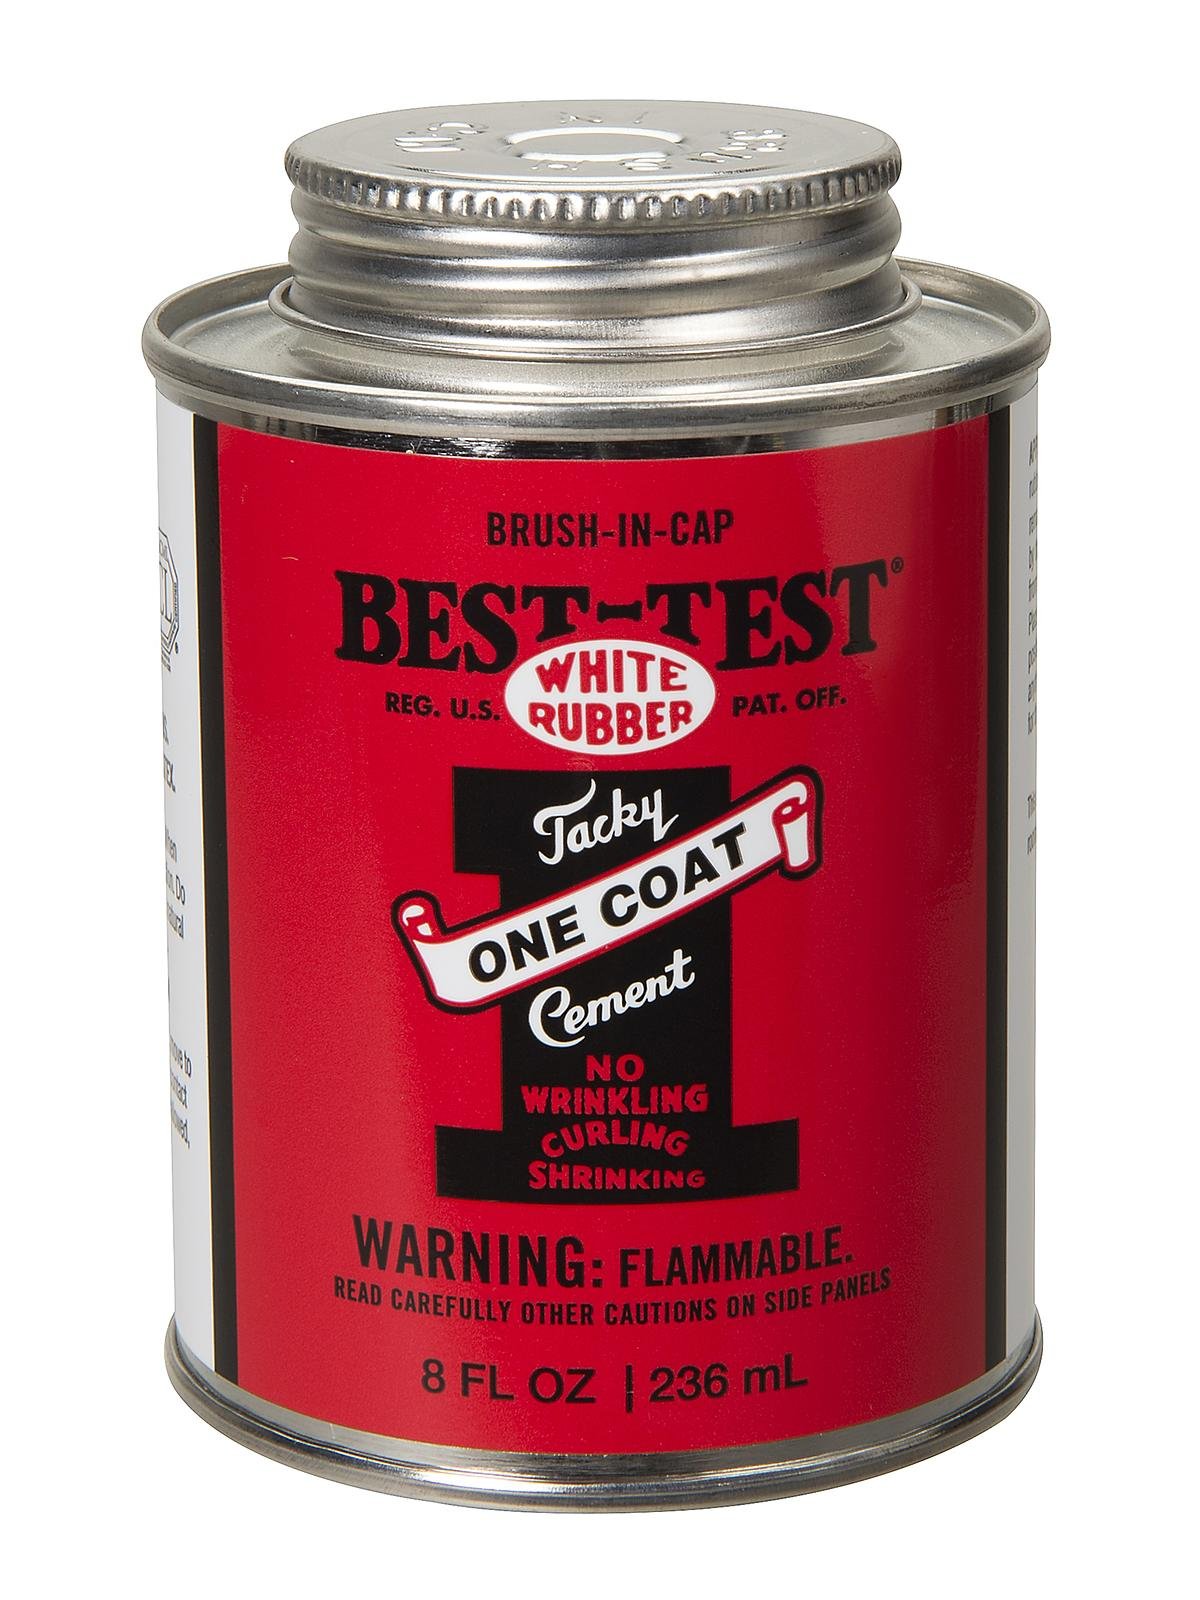 Best-Test - One-Coat Rubber Cement